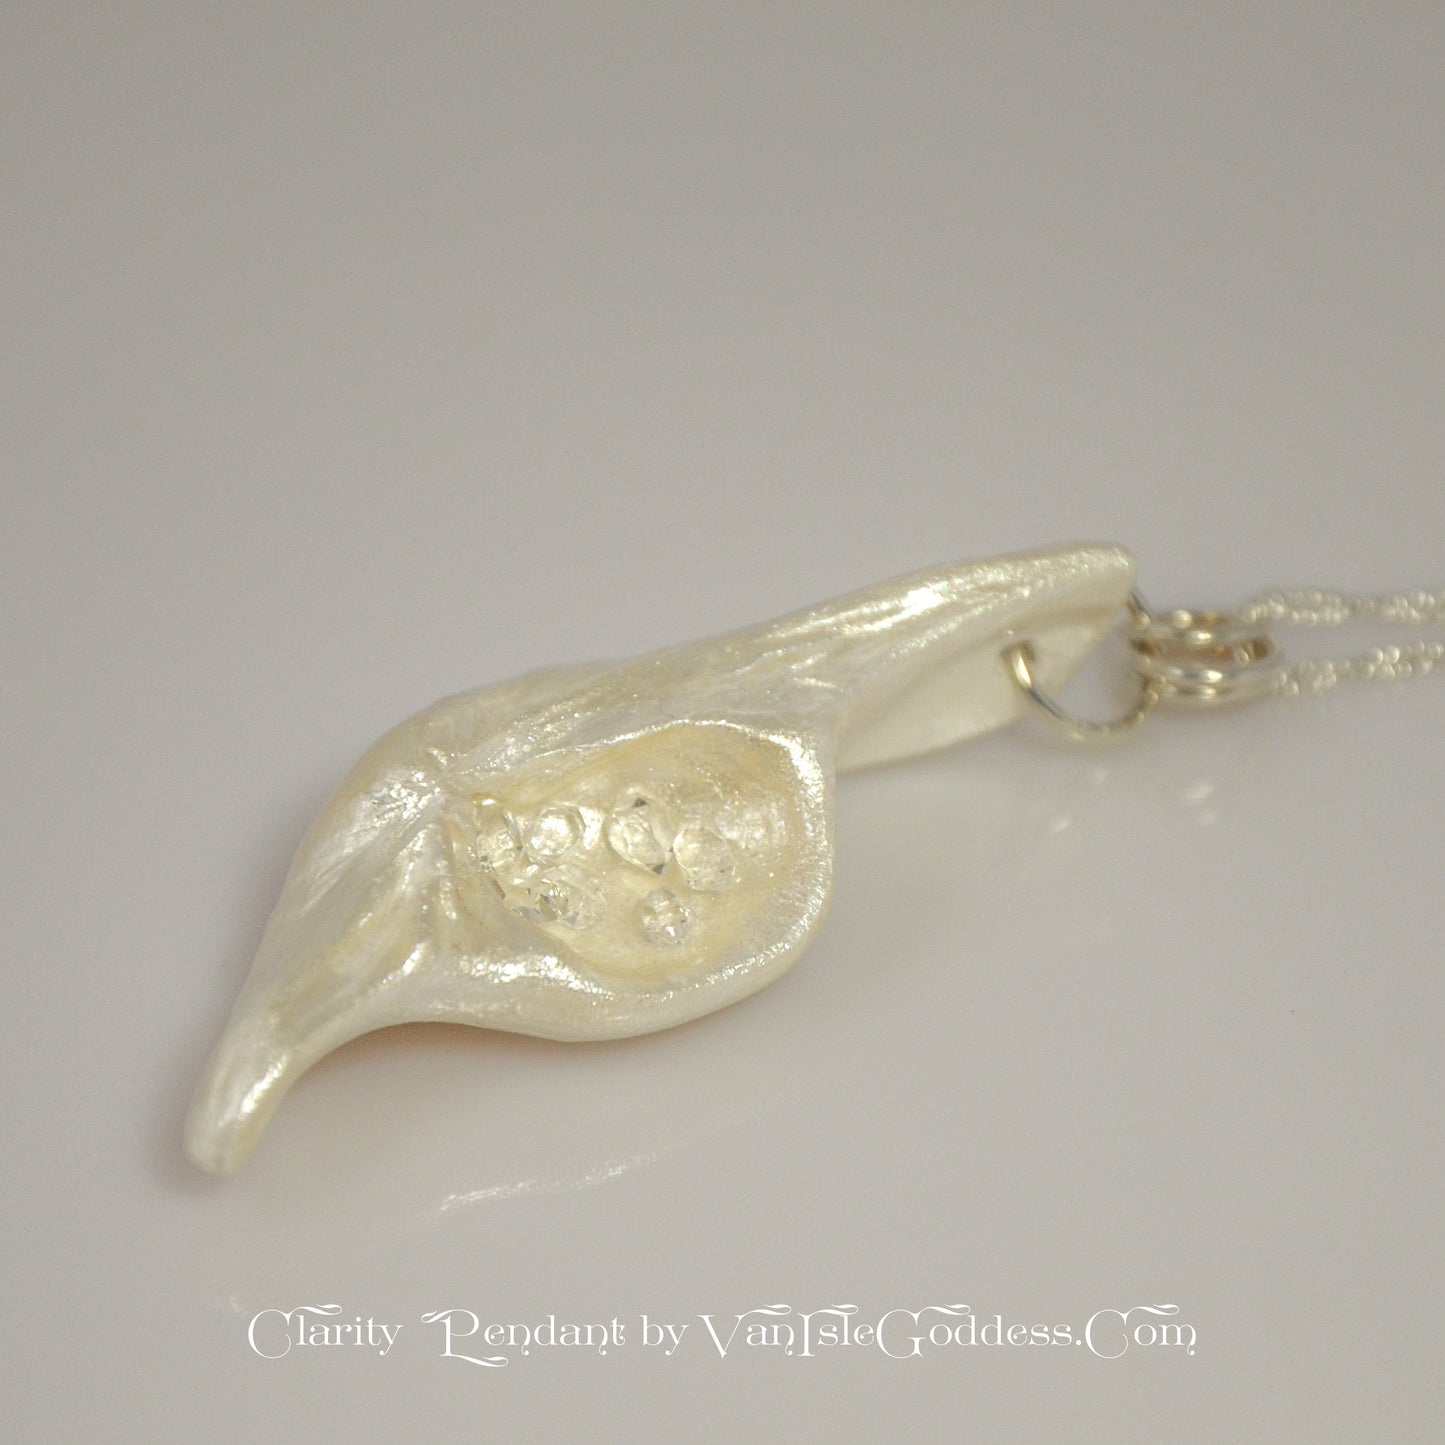 Beautiful pendant called Clarity.  Clarity is a natural seashell from the beach of Vancouver island.with seven herkimer diamonds. The pendant is shown on its side at an agle to show the shape of the pendant.  The print on the bottom of the image says Clarity Pendant by Van Isle Goddess dot com